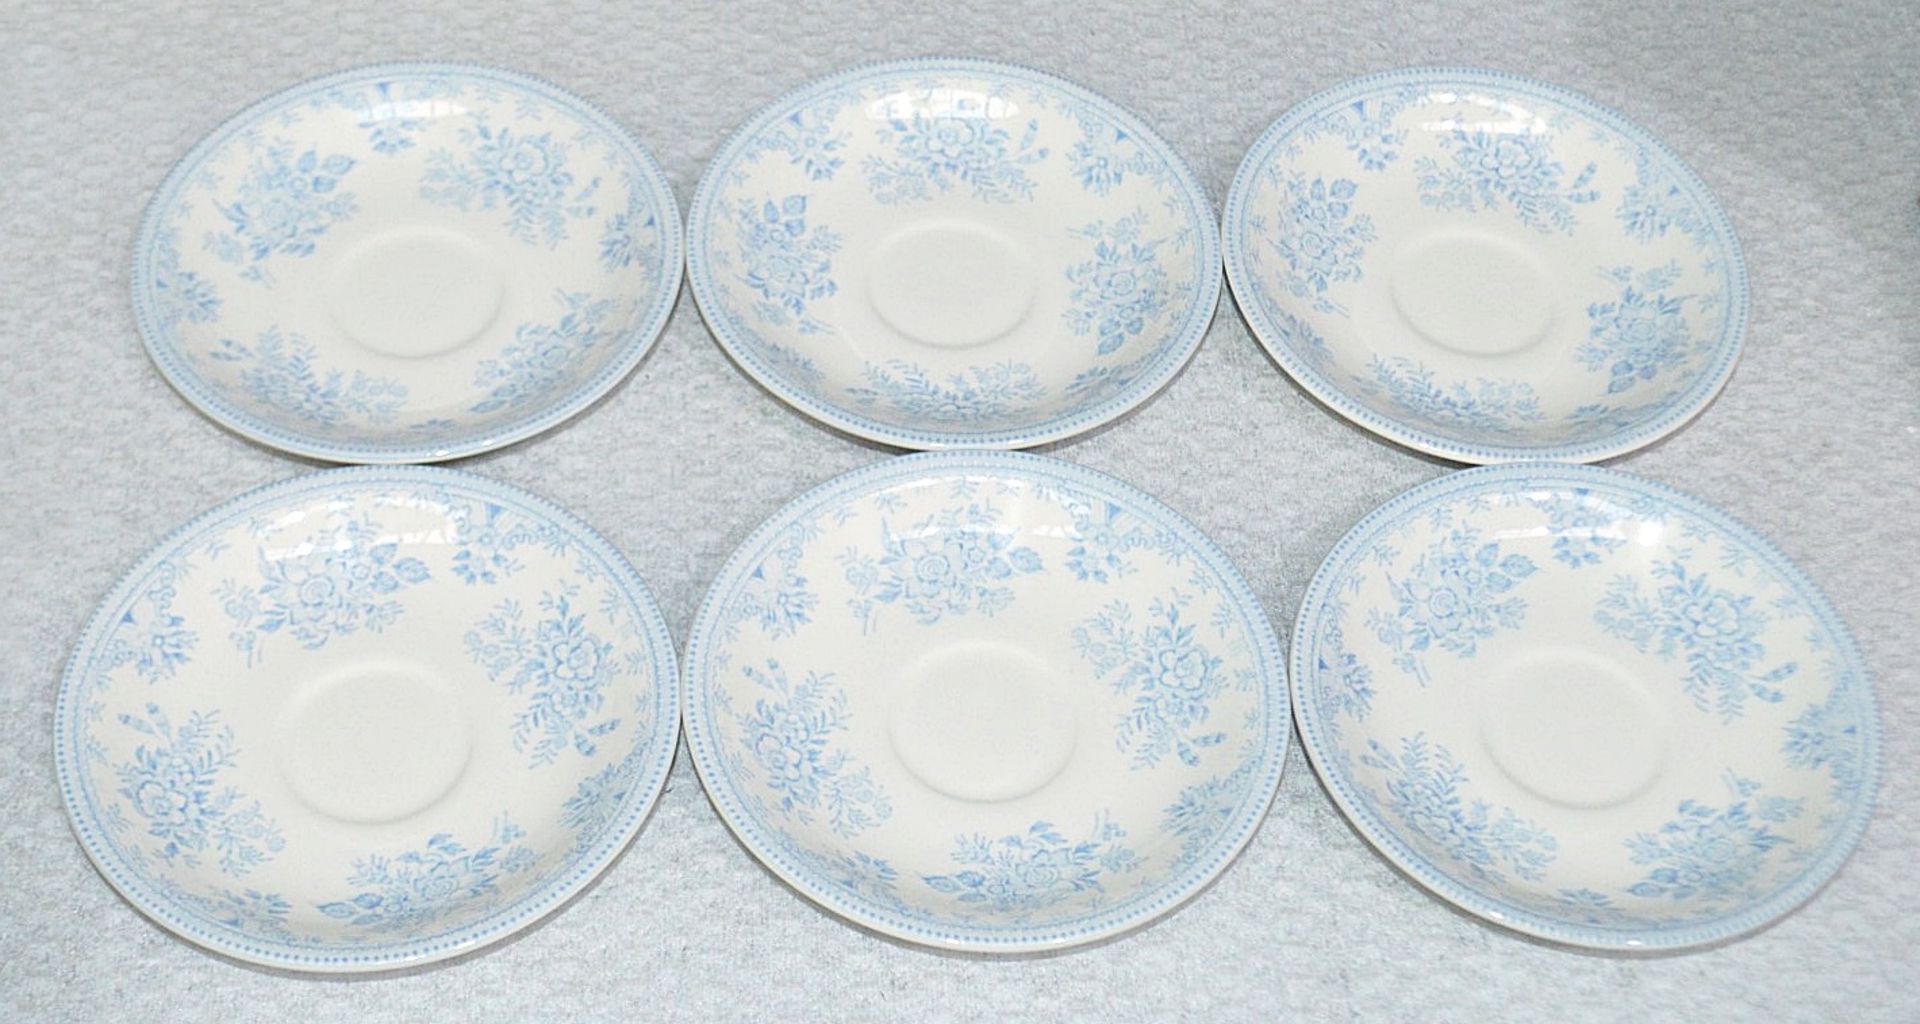 12 x BURLEIGH 'Blue Asiatic Pheasants' Handmade Teacup-Saucers - Unboxed Stock - Ref: HHW211-212/ - Image 4 of 5